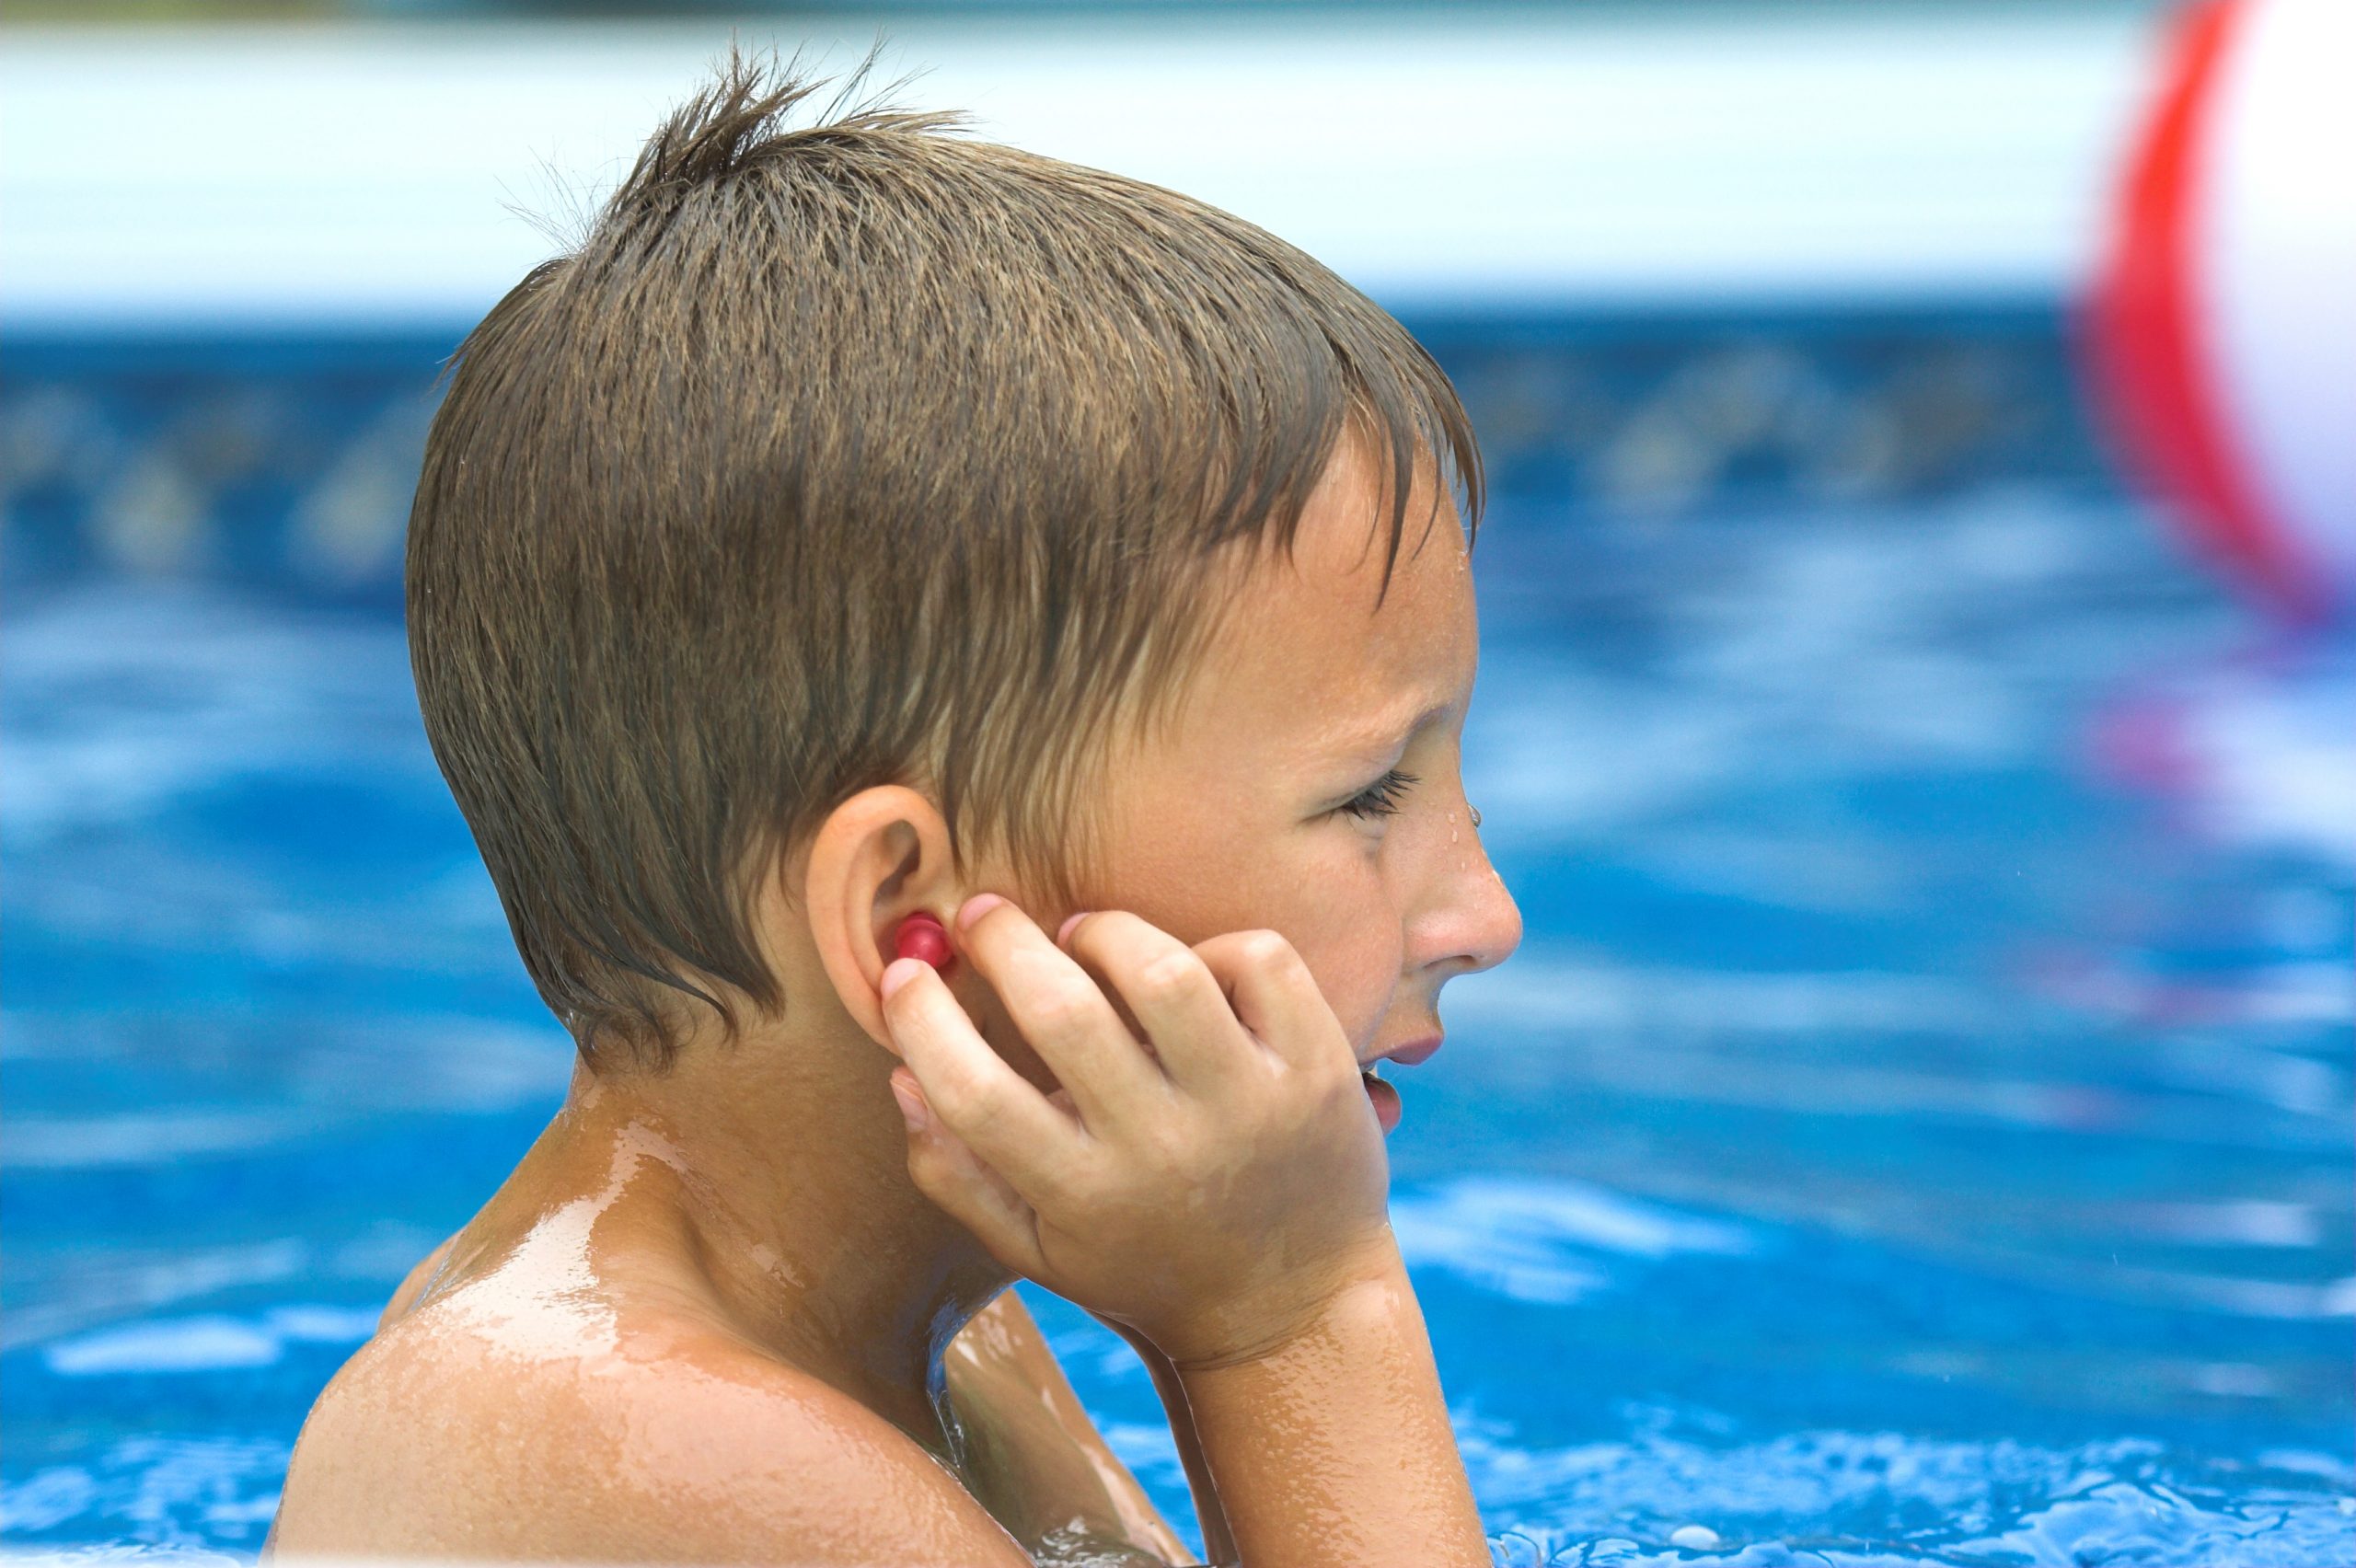 Swimmer's ear syndrome otitis externa - condition addressed with compounded ear drops